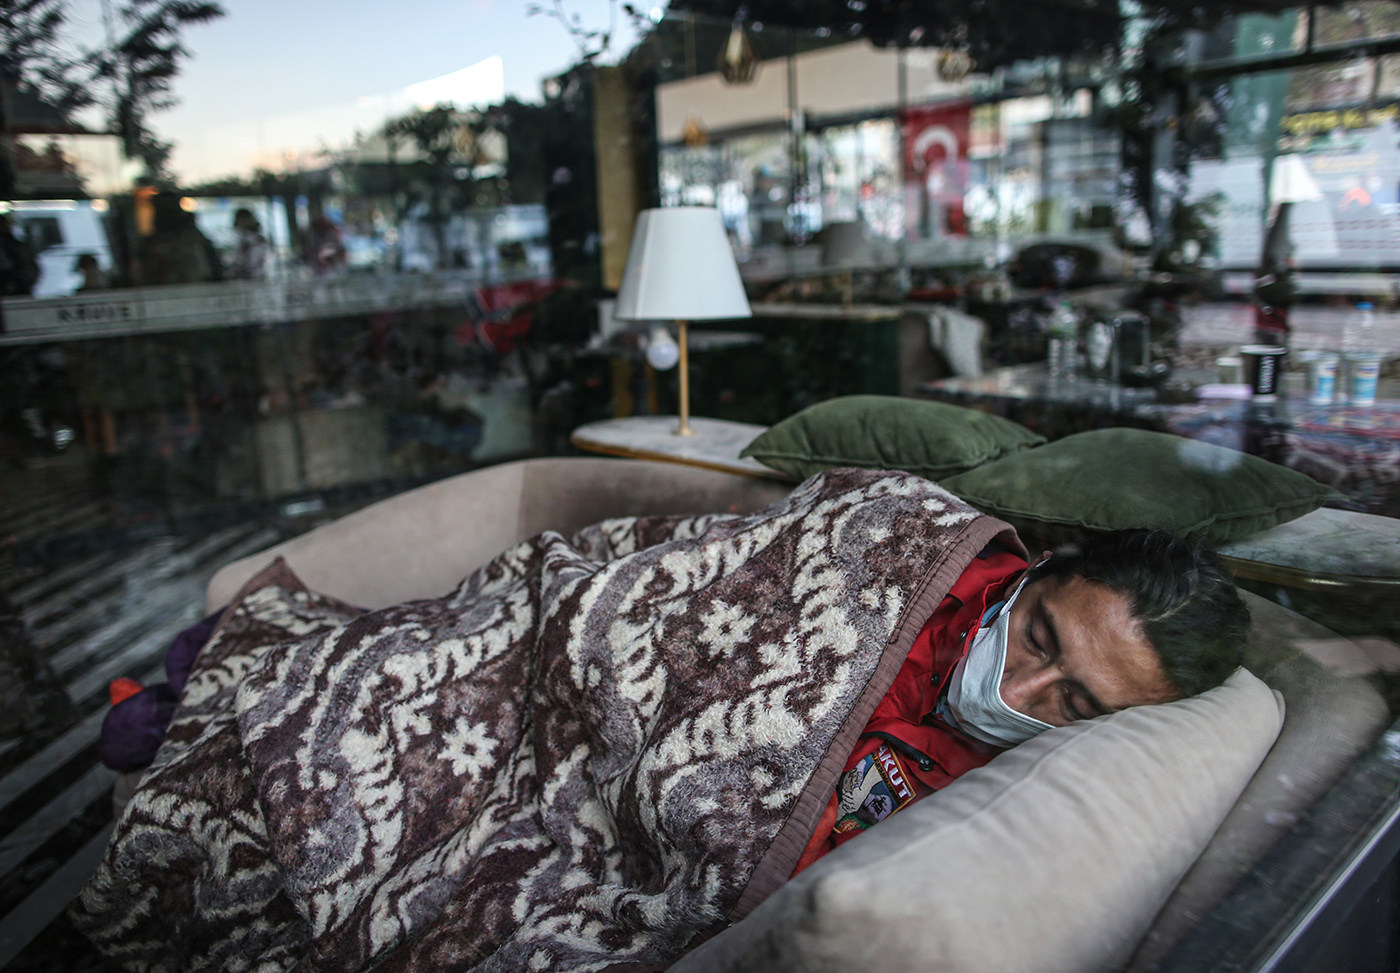 A rescue worker sleeps at a cafe after a 7.0 magnitude earthquake in the Aegean Sea, at Bayrakli district in Izmir, Turkey, 01 November 2020. According to Turkish media reports, at least forty nine people died while more than eight  hundreds were injured and dozens of buildings were destroyed in the earthquake.